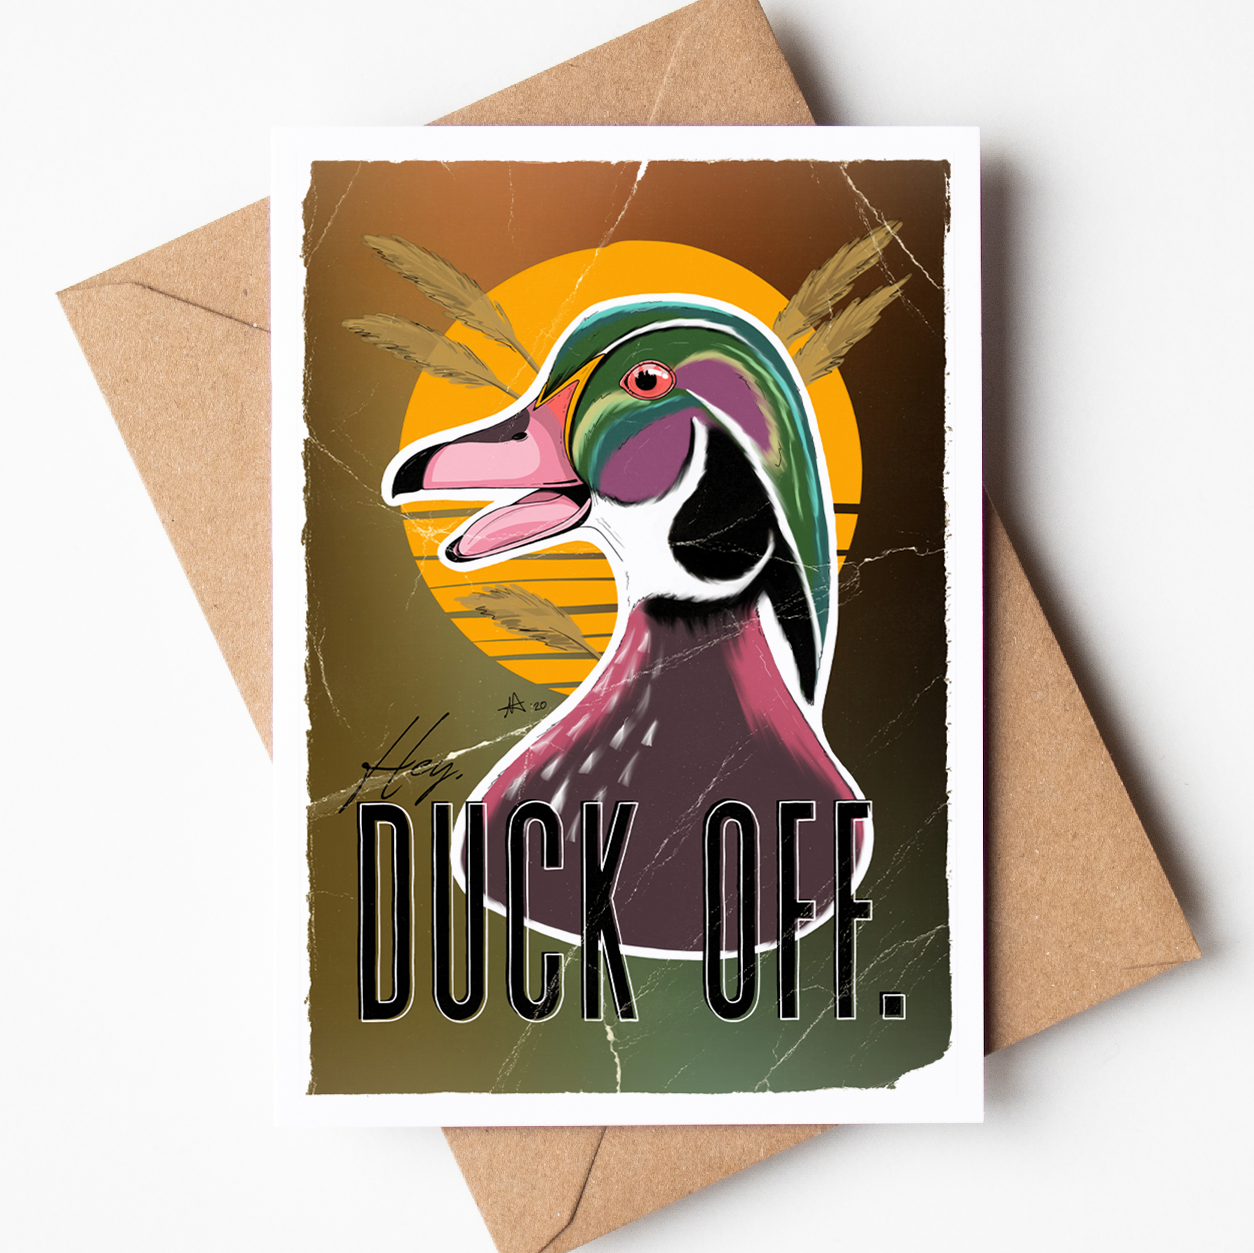 "Hey, DUCK OFF" - Greeting Card